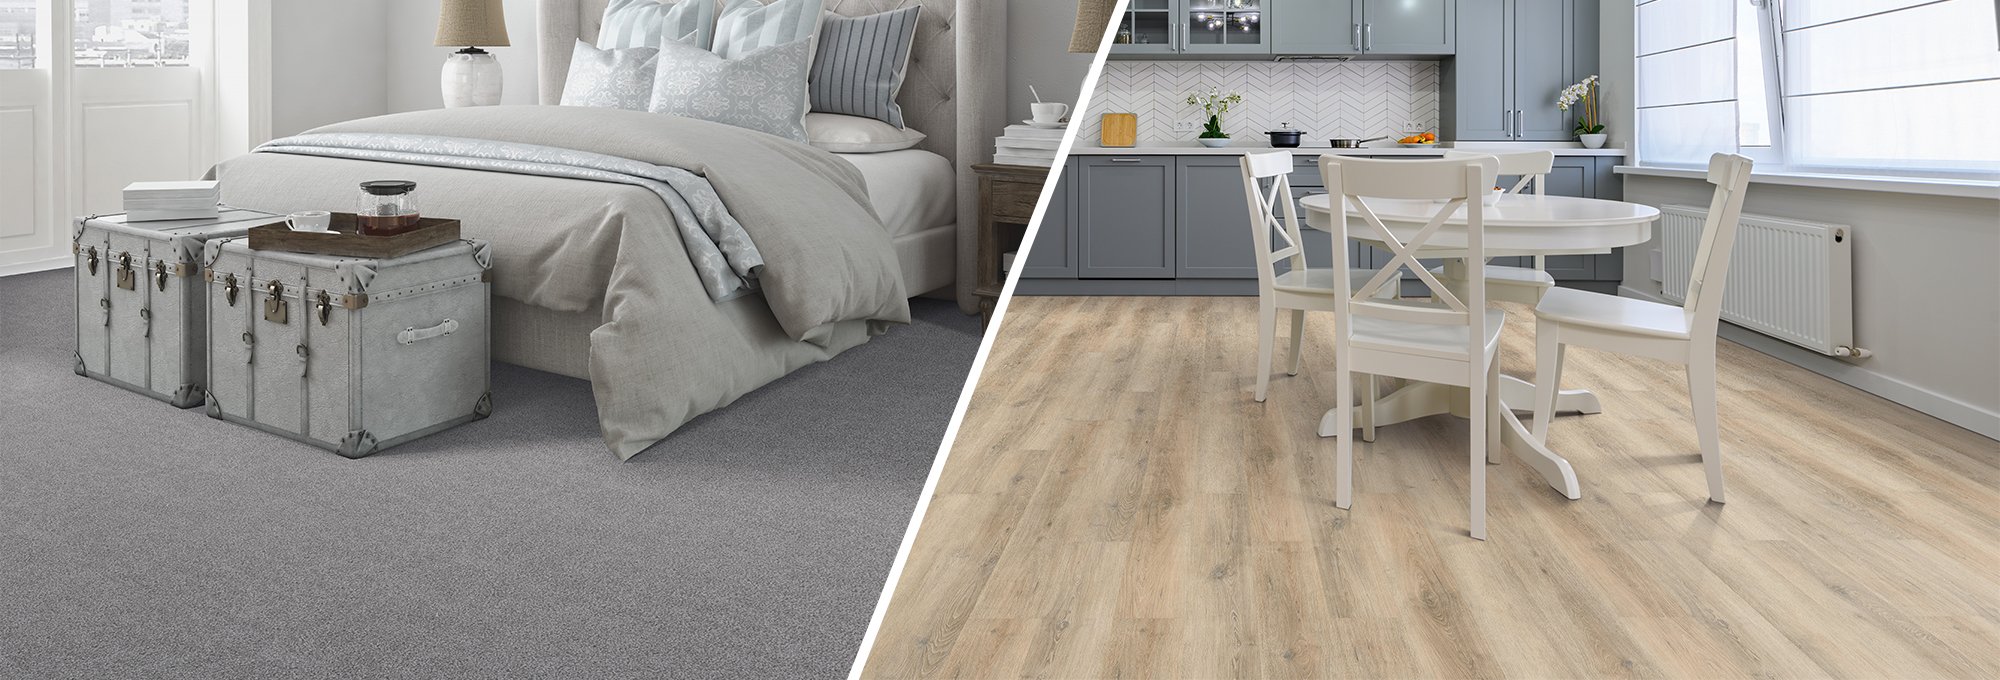 Flooring Products from EF Multifamily in Dalton